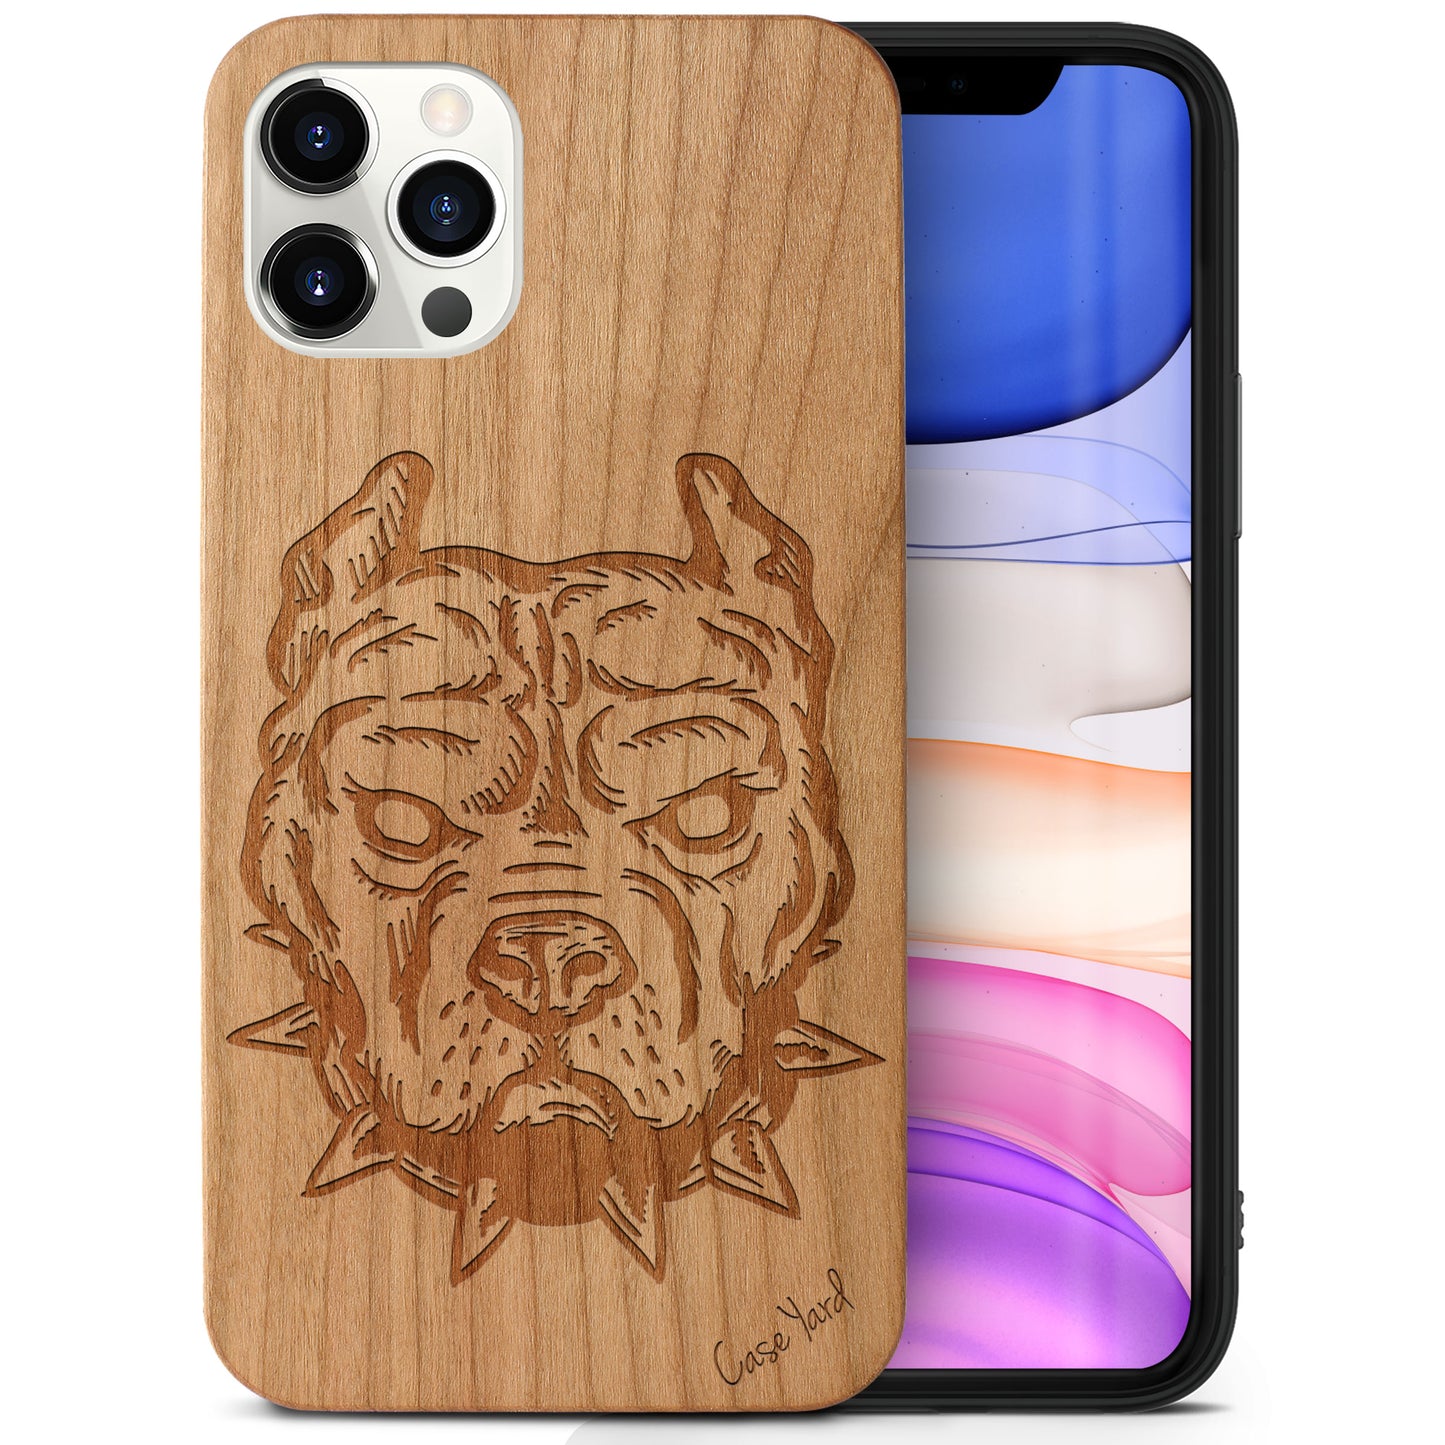 Wooden Cell Phone Case Cover, Laser Engraved case for iPhone & Samsung phone Pitbull Design